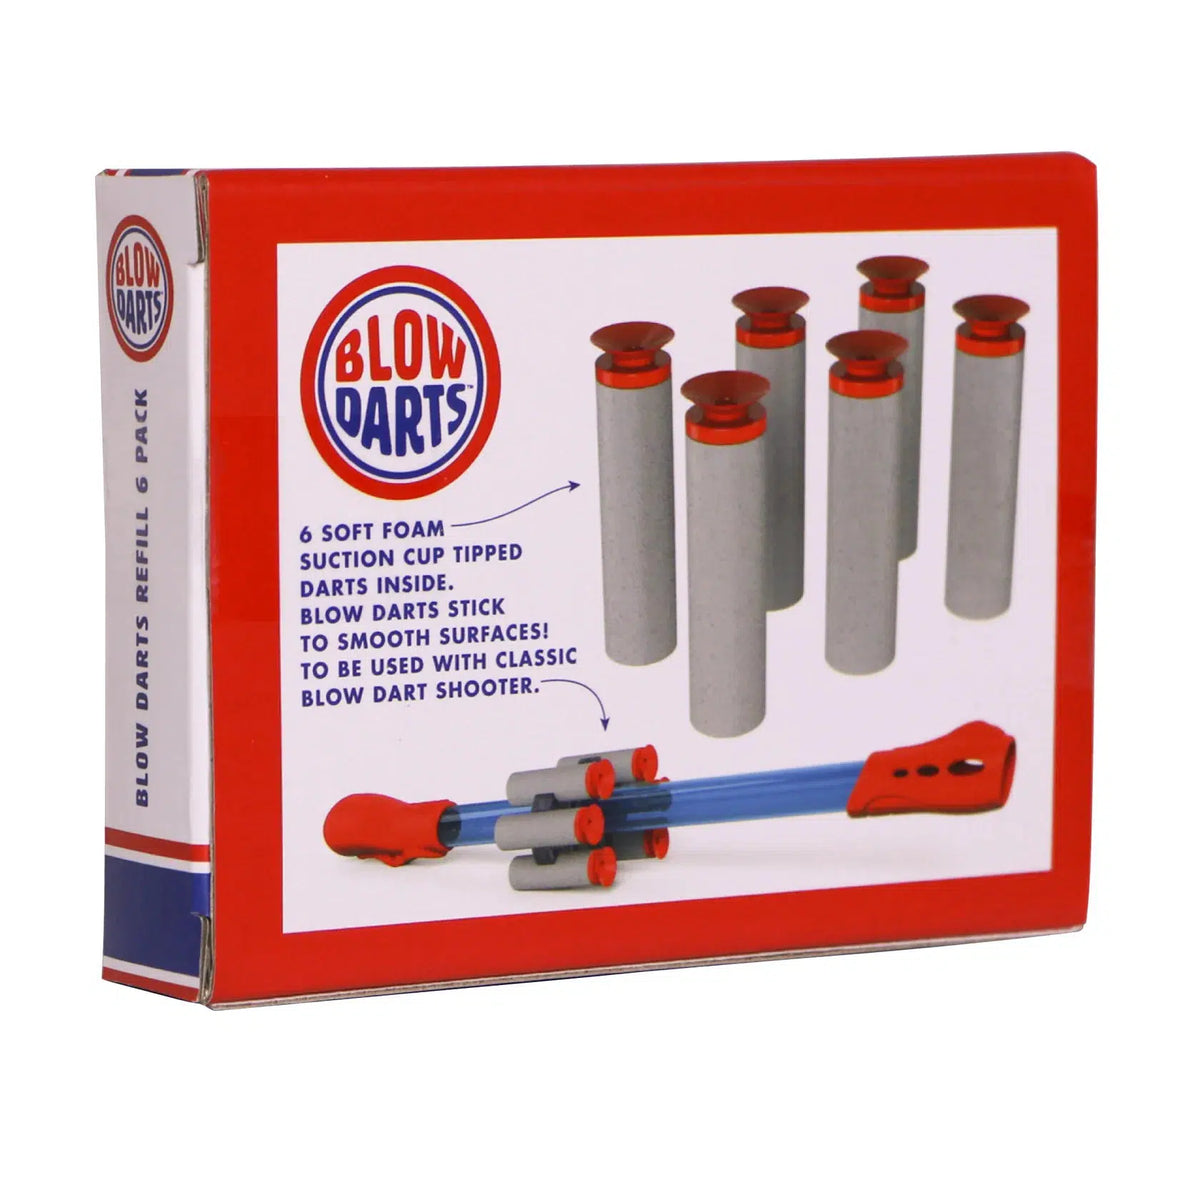 Rear view of Refill Blow Darts in box.